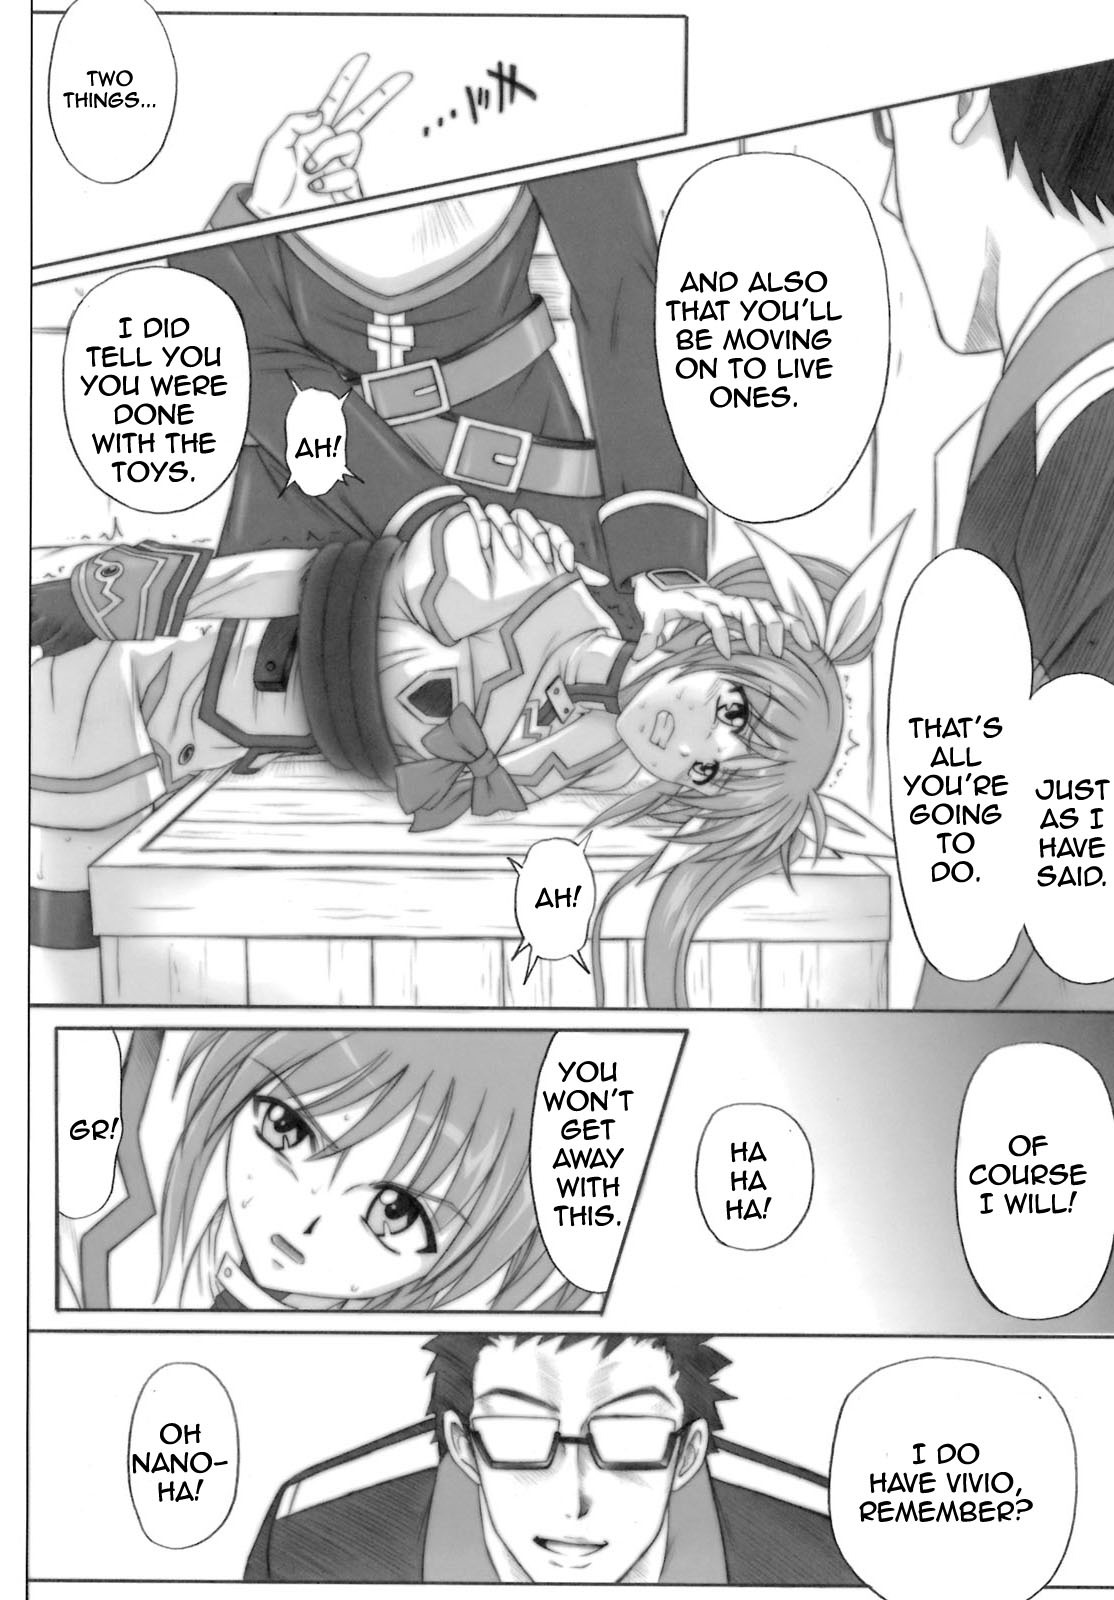 840 Color Classic Situation Note Extention (Mahou Shoujo Lyrical Nanoha) [English] [Rewrite] page 30 full